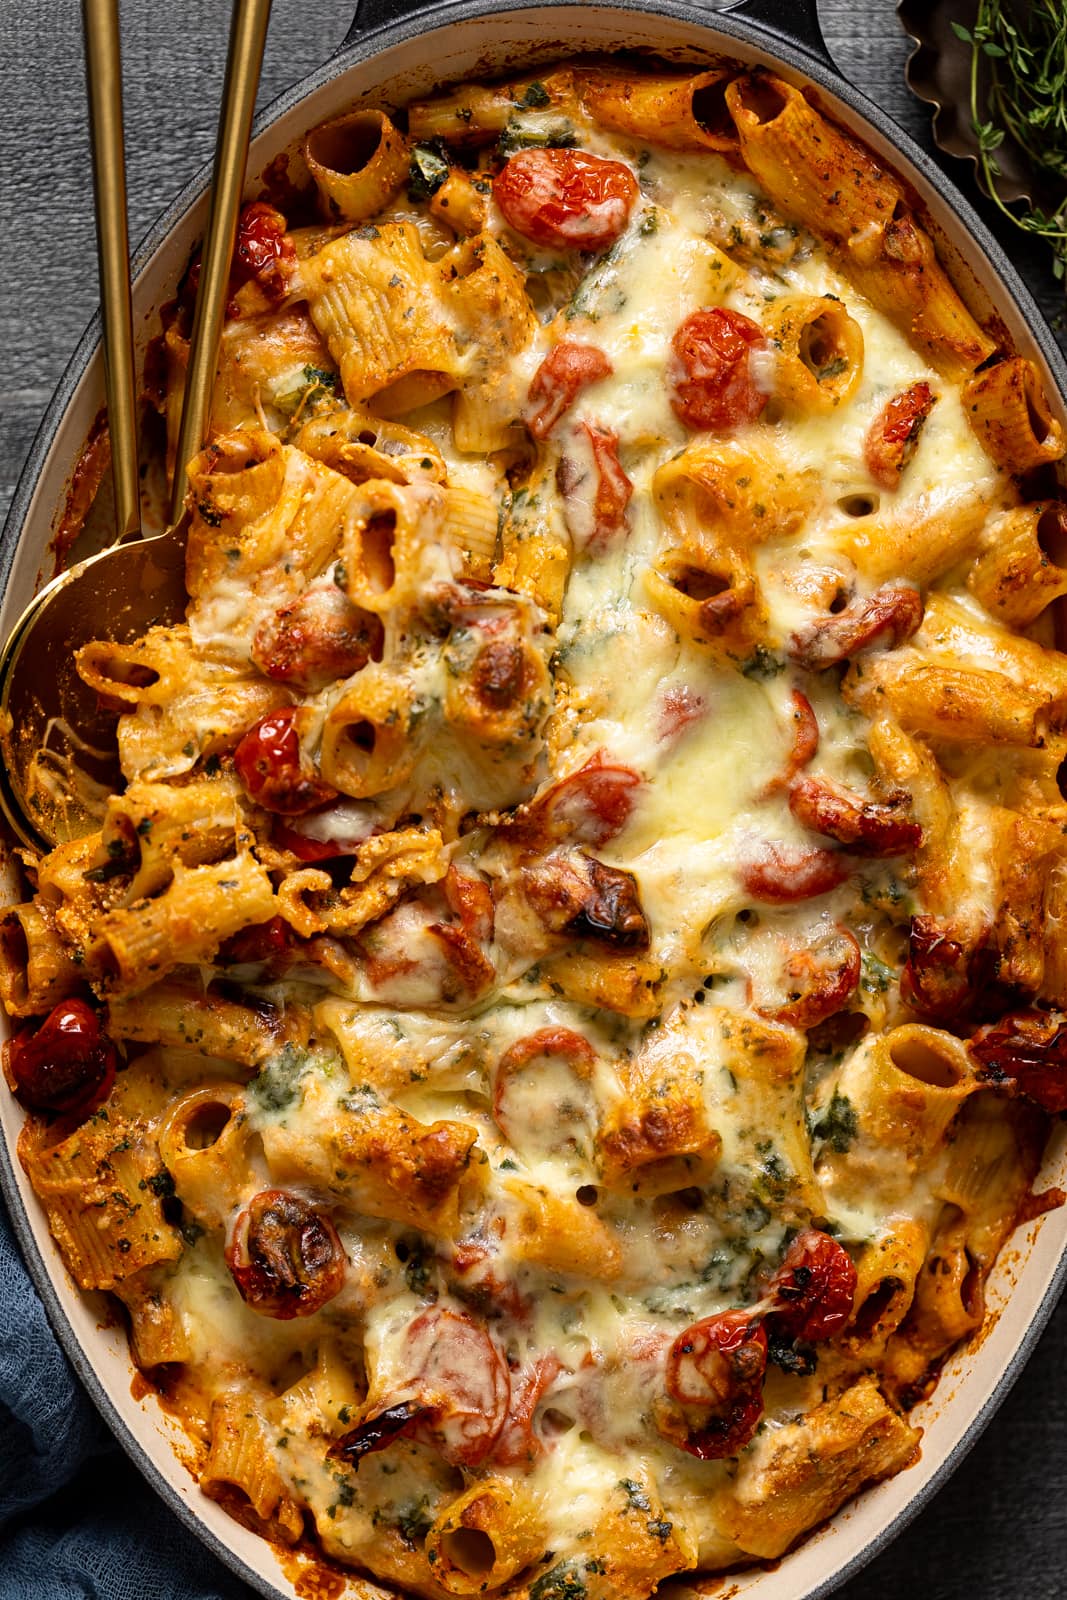 Dutch oven full of Meatless Baked Ziti with Ricotta and Mozzarella